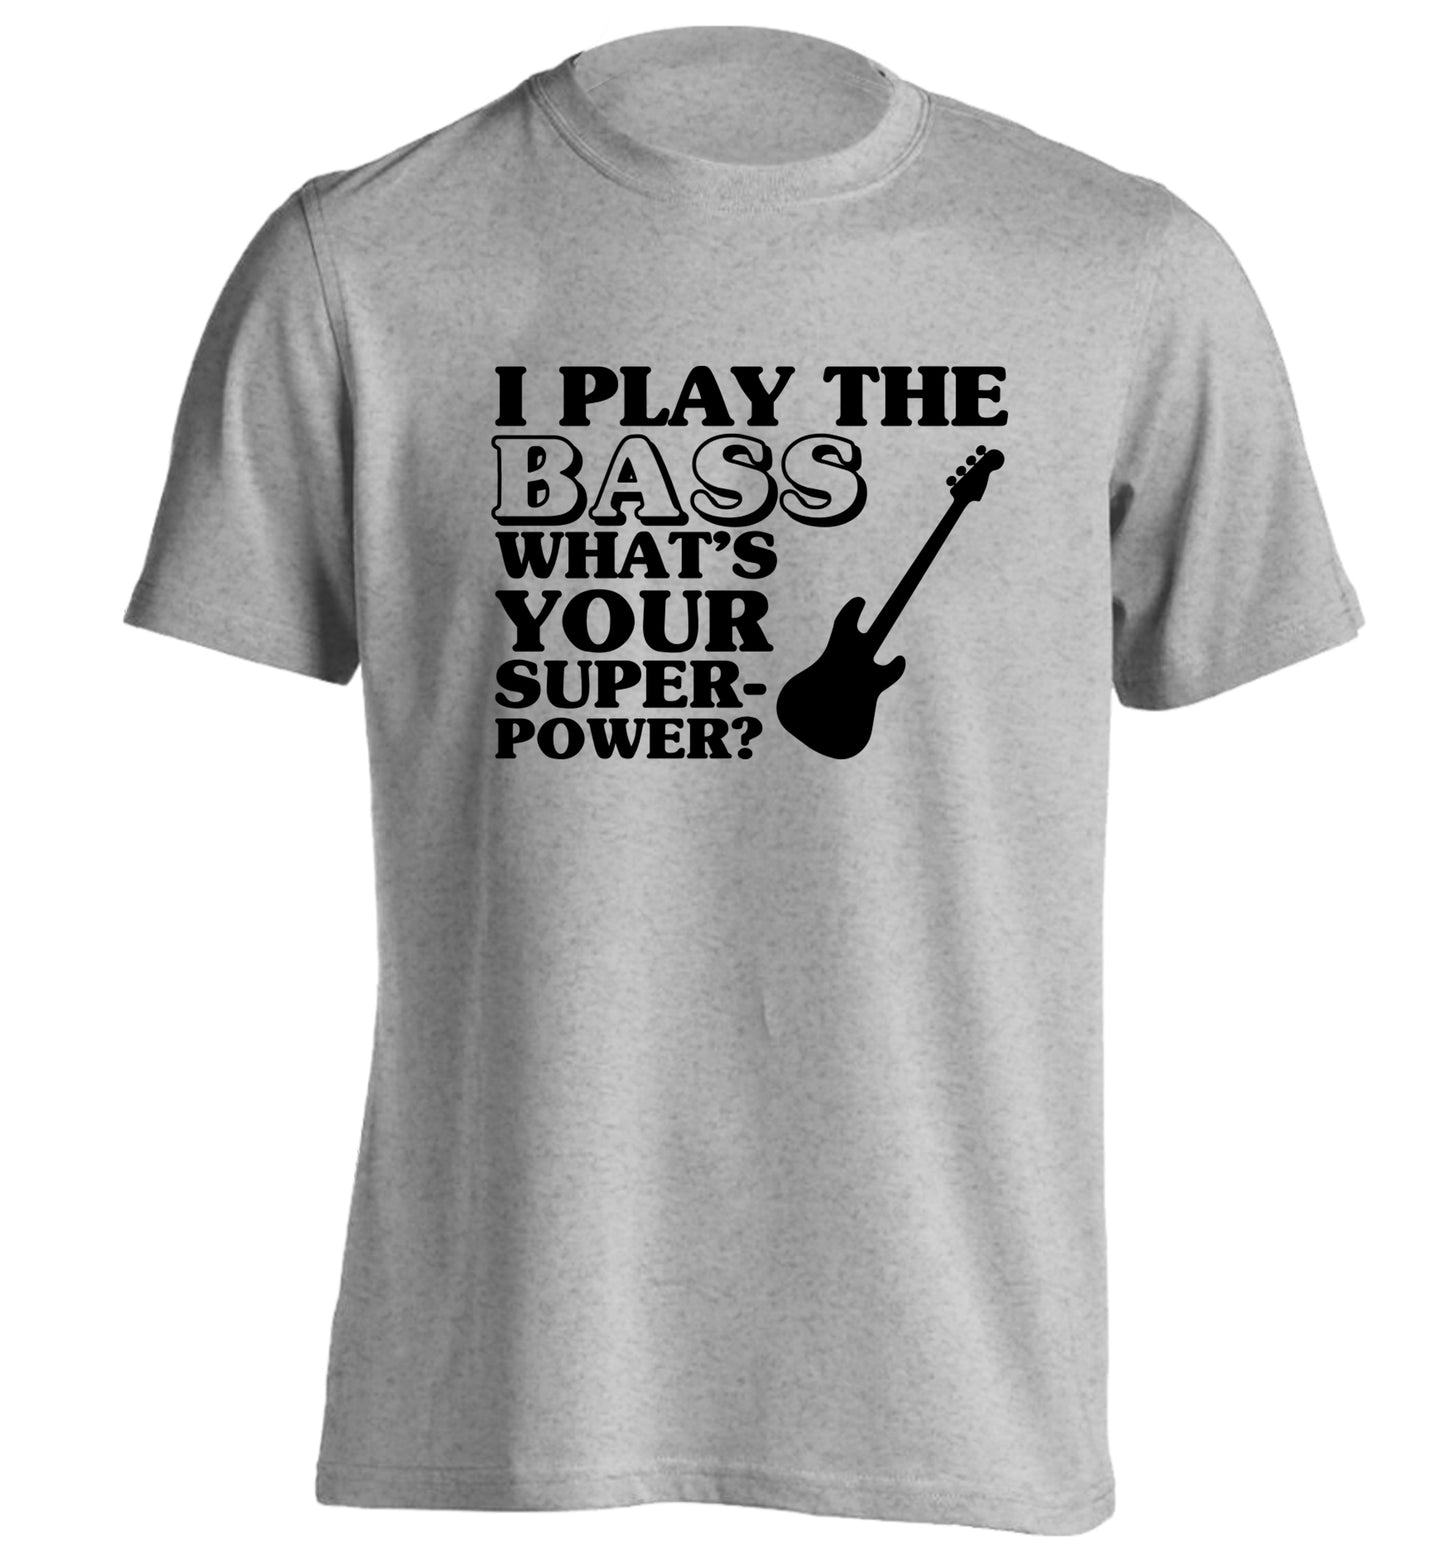 I play the bass what's your superpower? adults unisex grey Tshirt 2XL